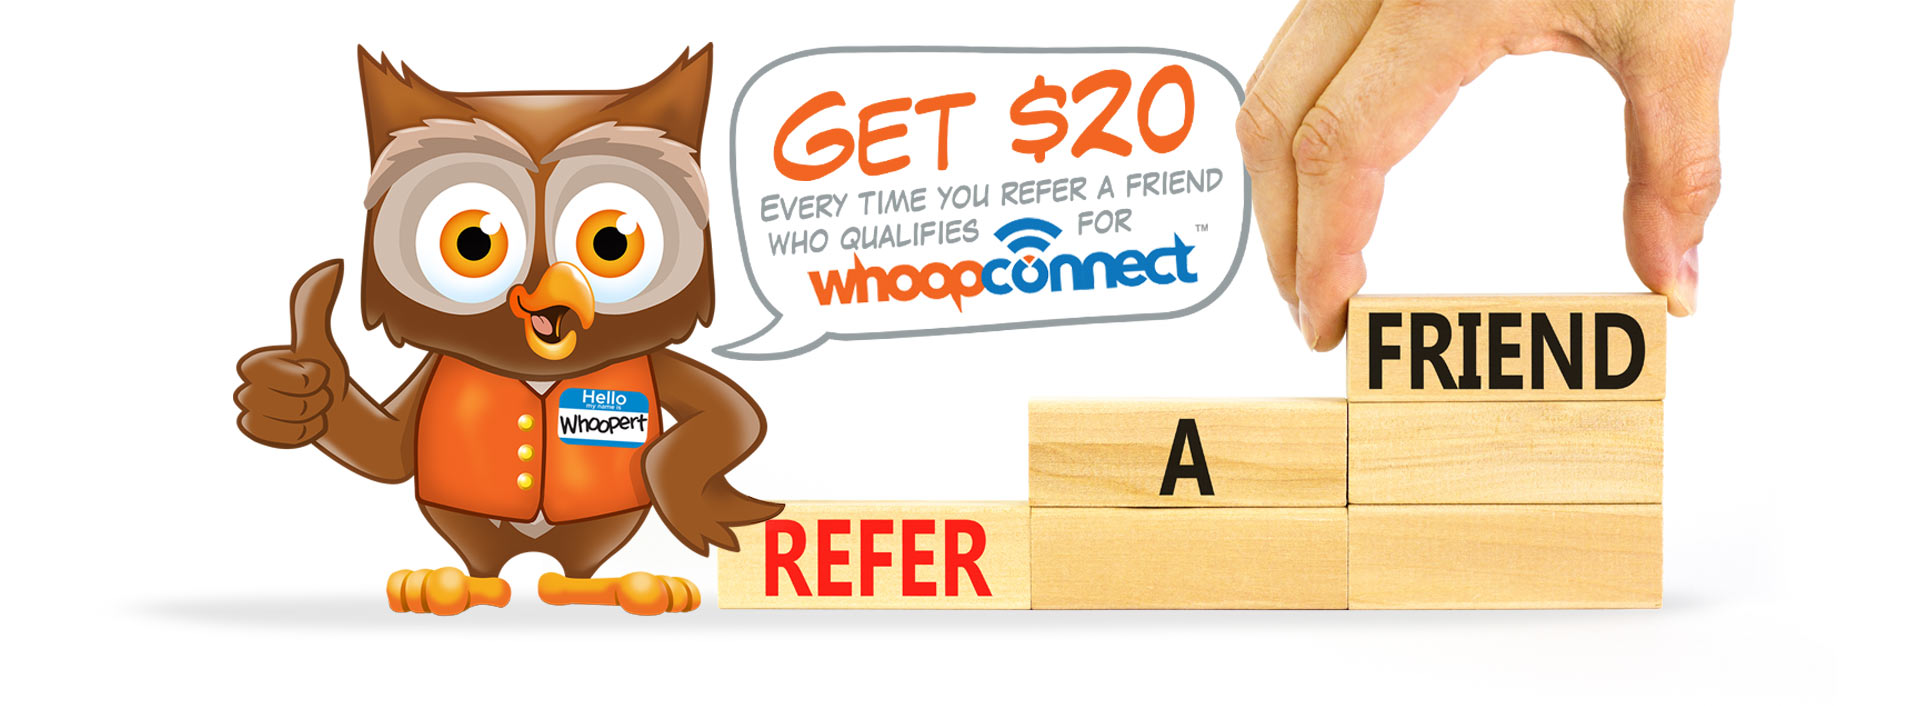 Get $20 Every time you refer a friend who qualifies for Whoop Connect!